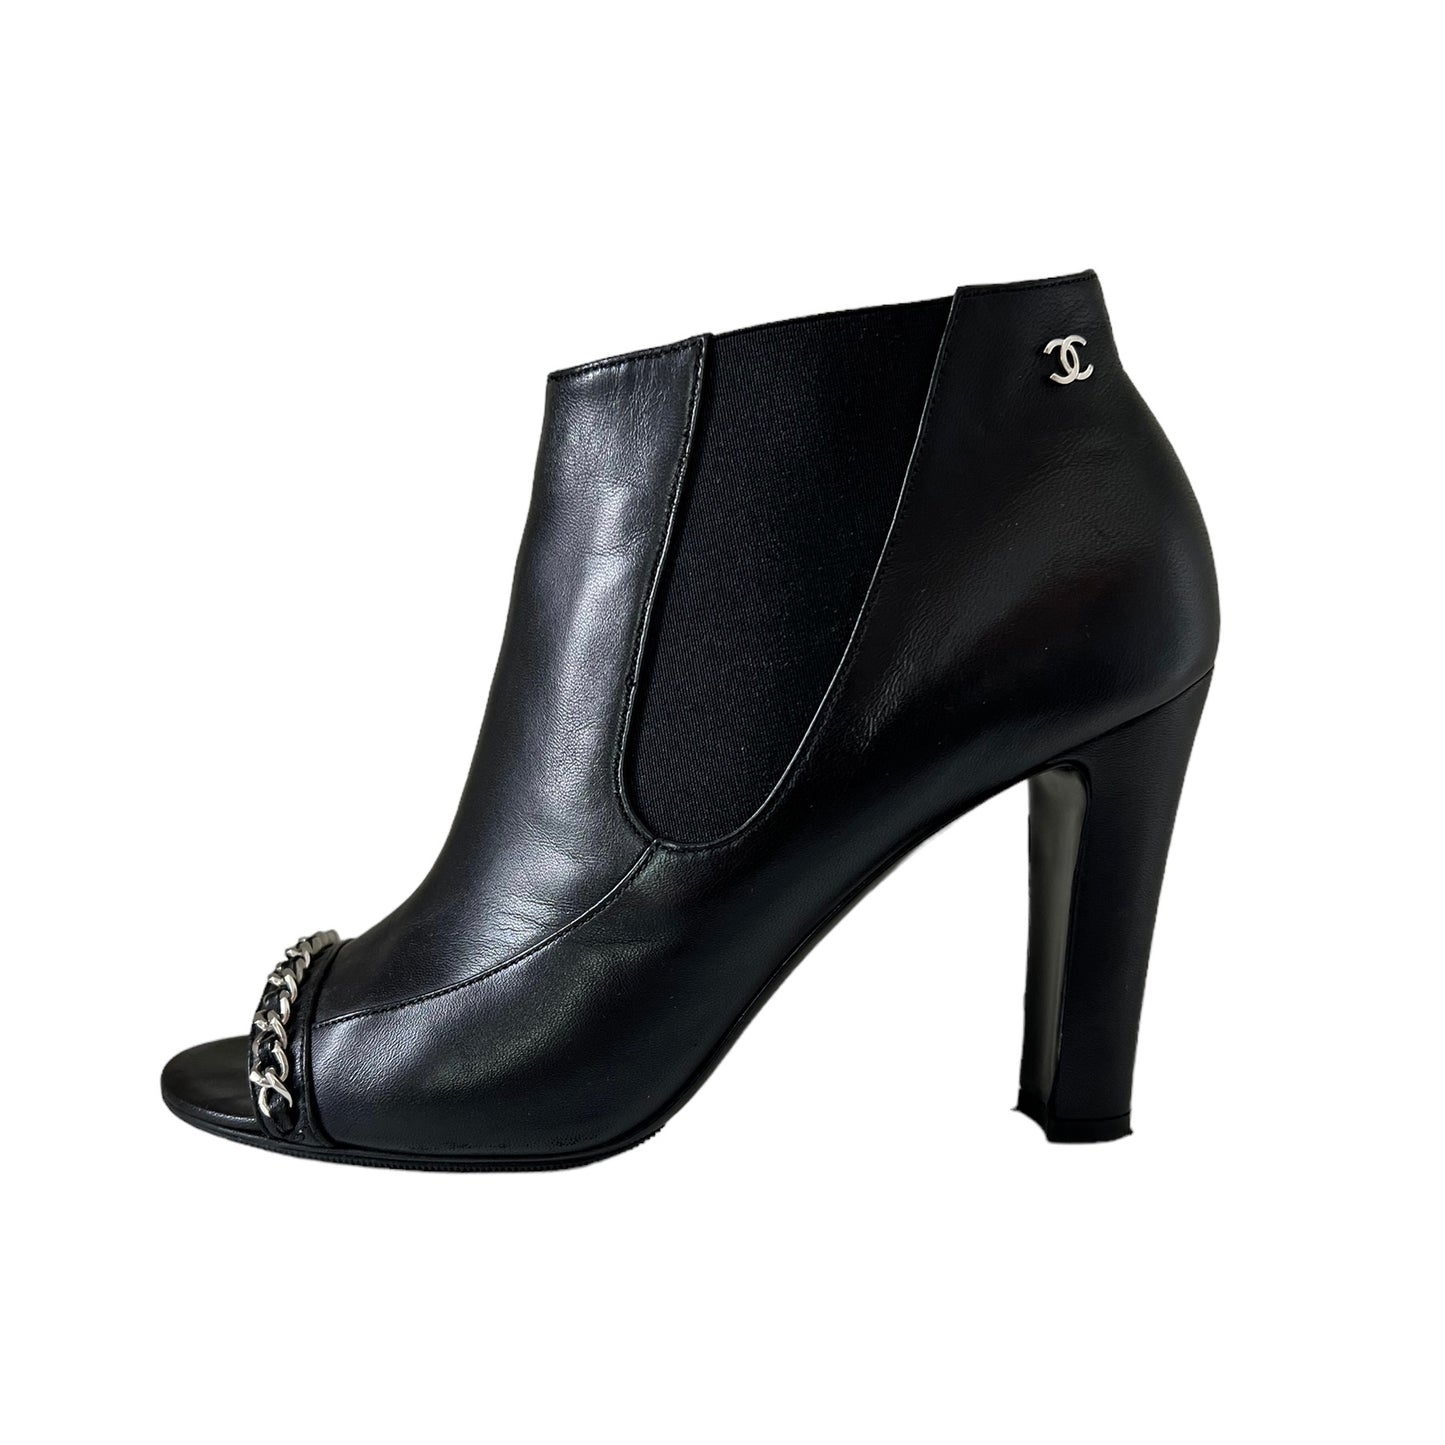 Chanel CC Leather Ankle Boots, Size 38.5